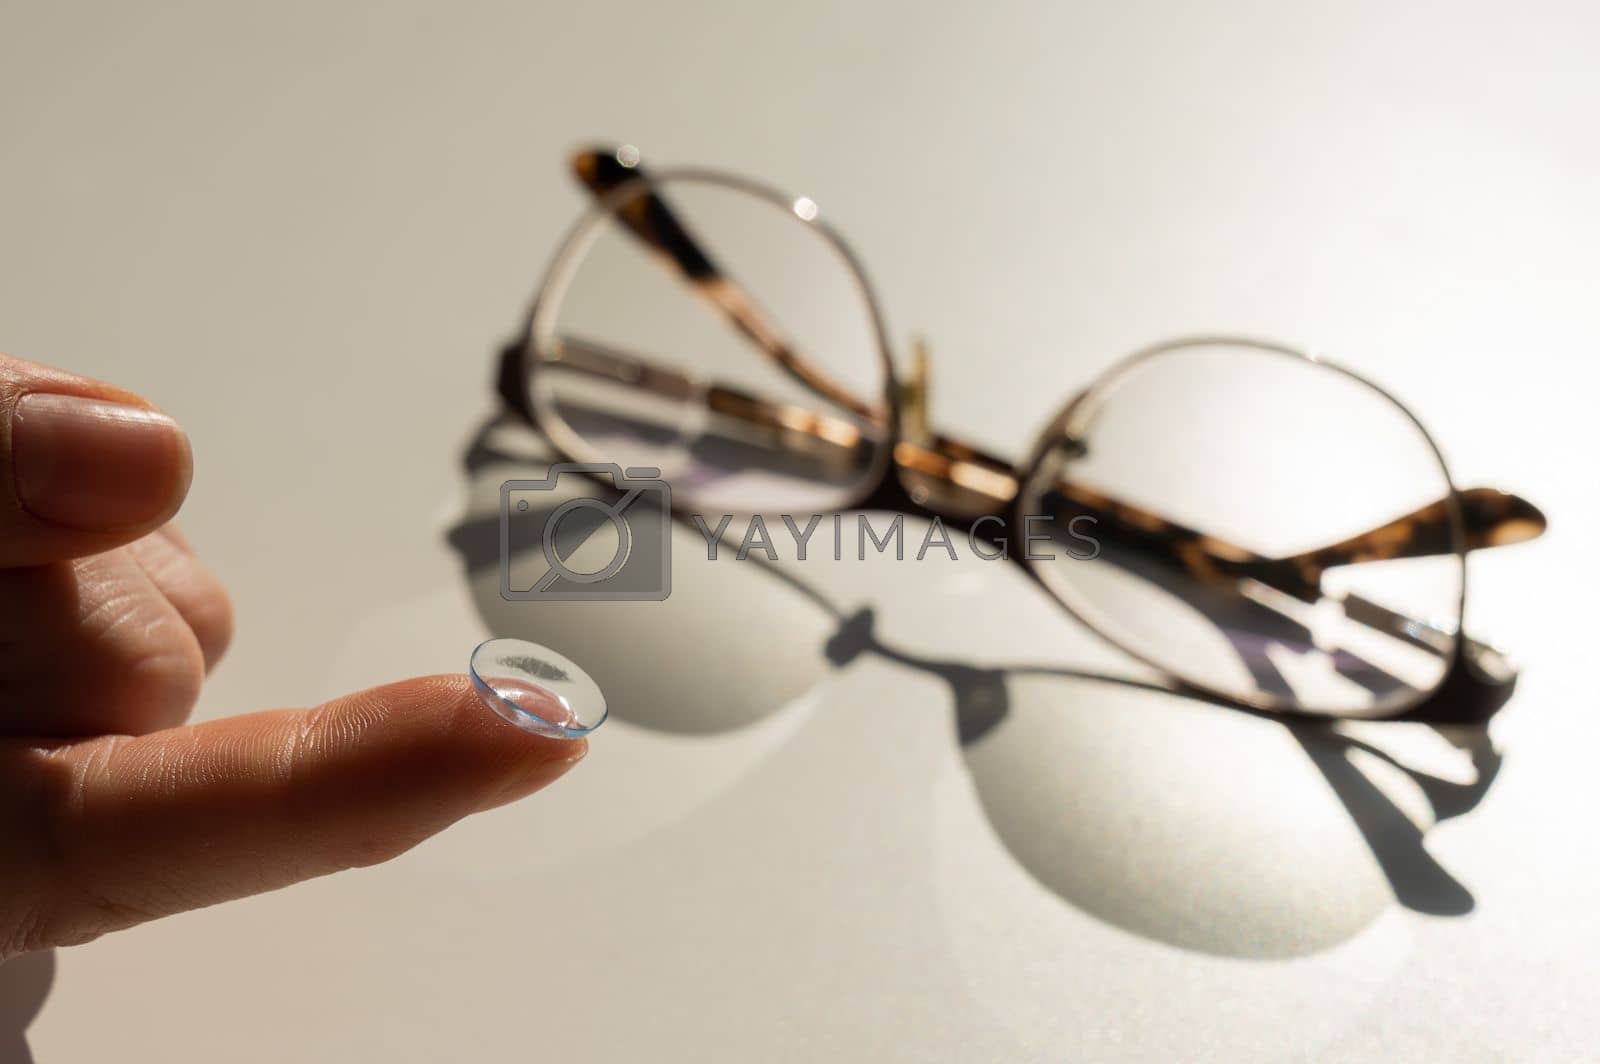 Royalty free image of Close-up of a contact lens on a female index finger against the background of glasses on a white table. by mrwed54